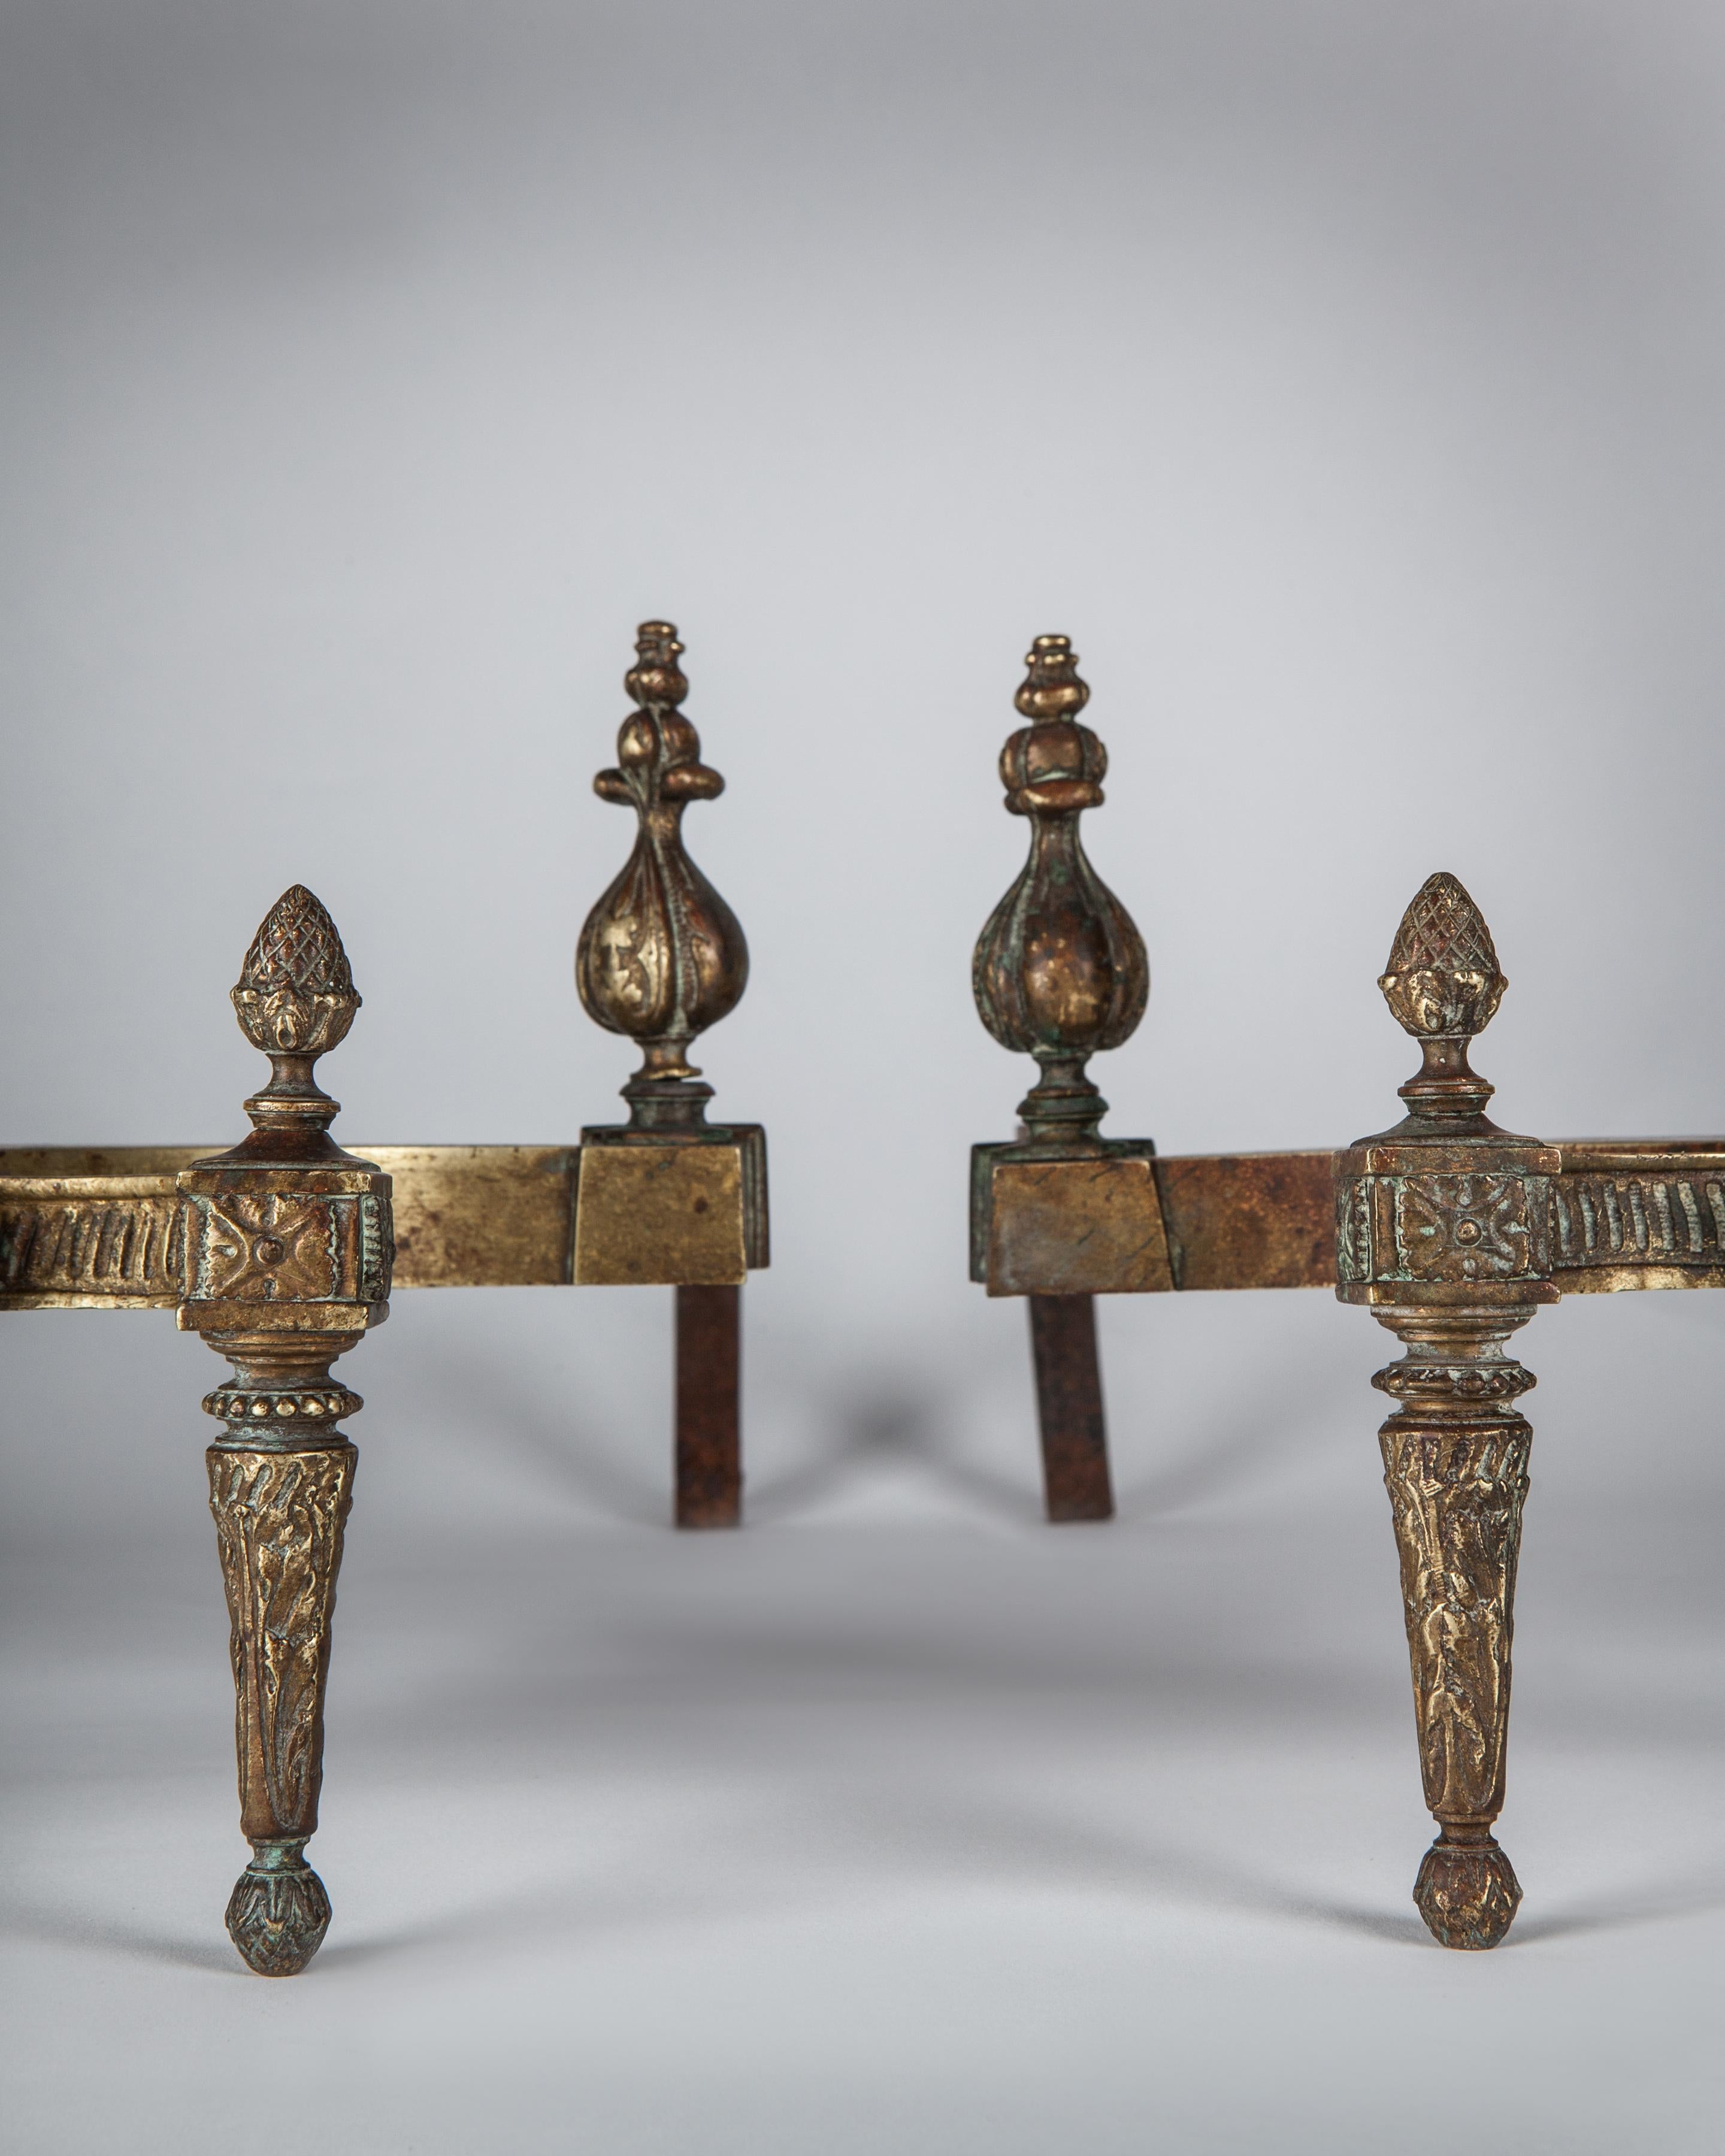 Antique Neoclassical Cast Brass Andirons with Tapered Fluted Columns, Circa 1900 For Sale 2